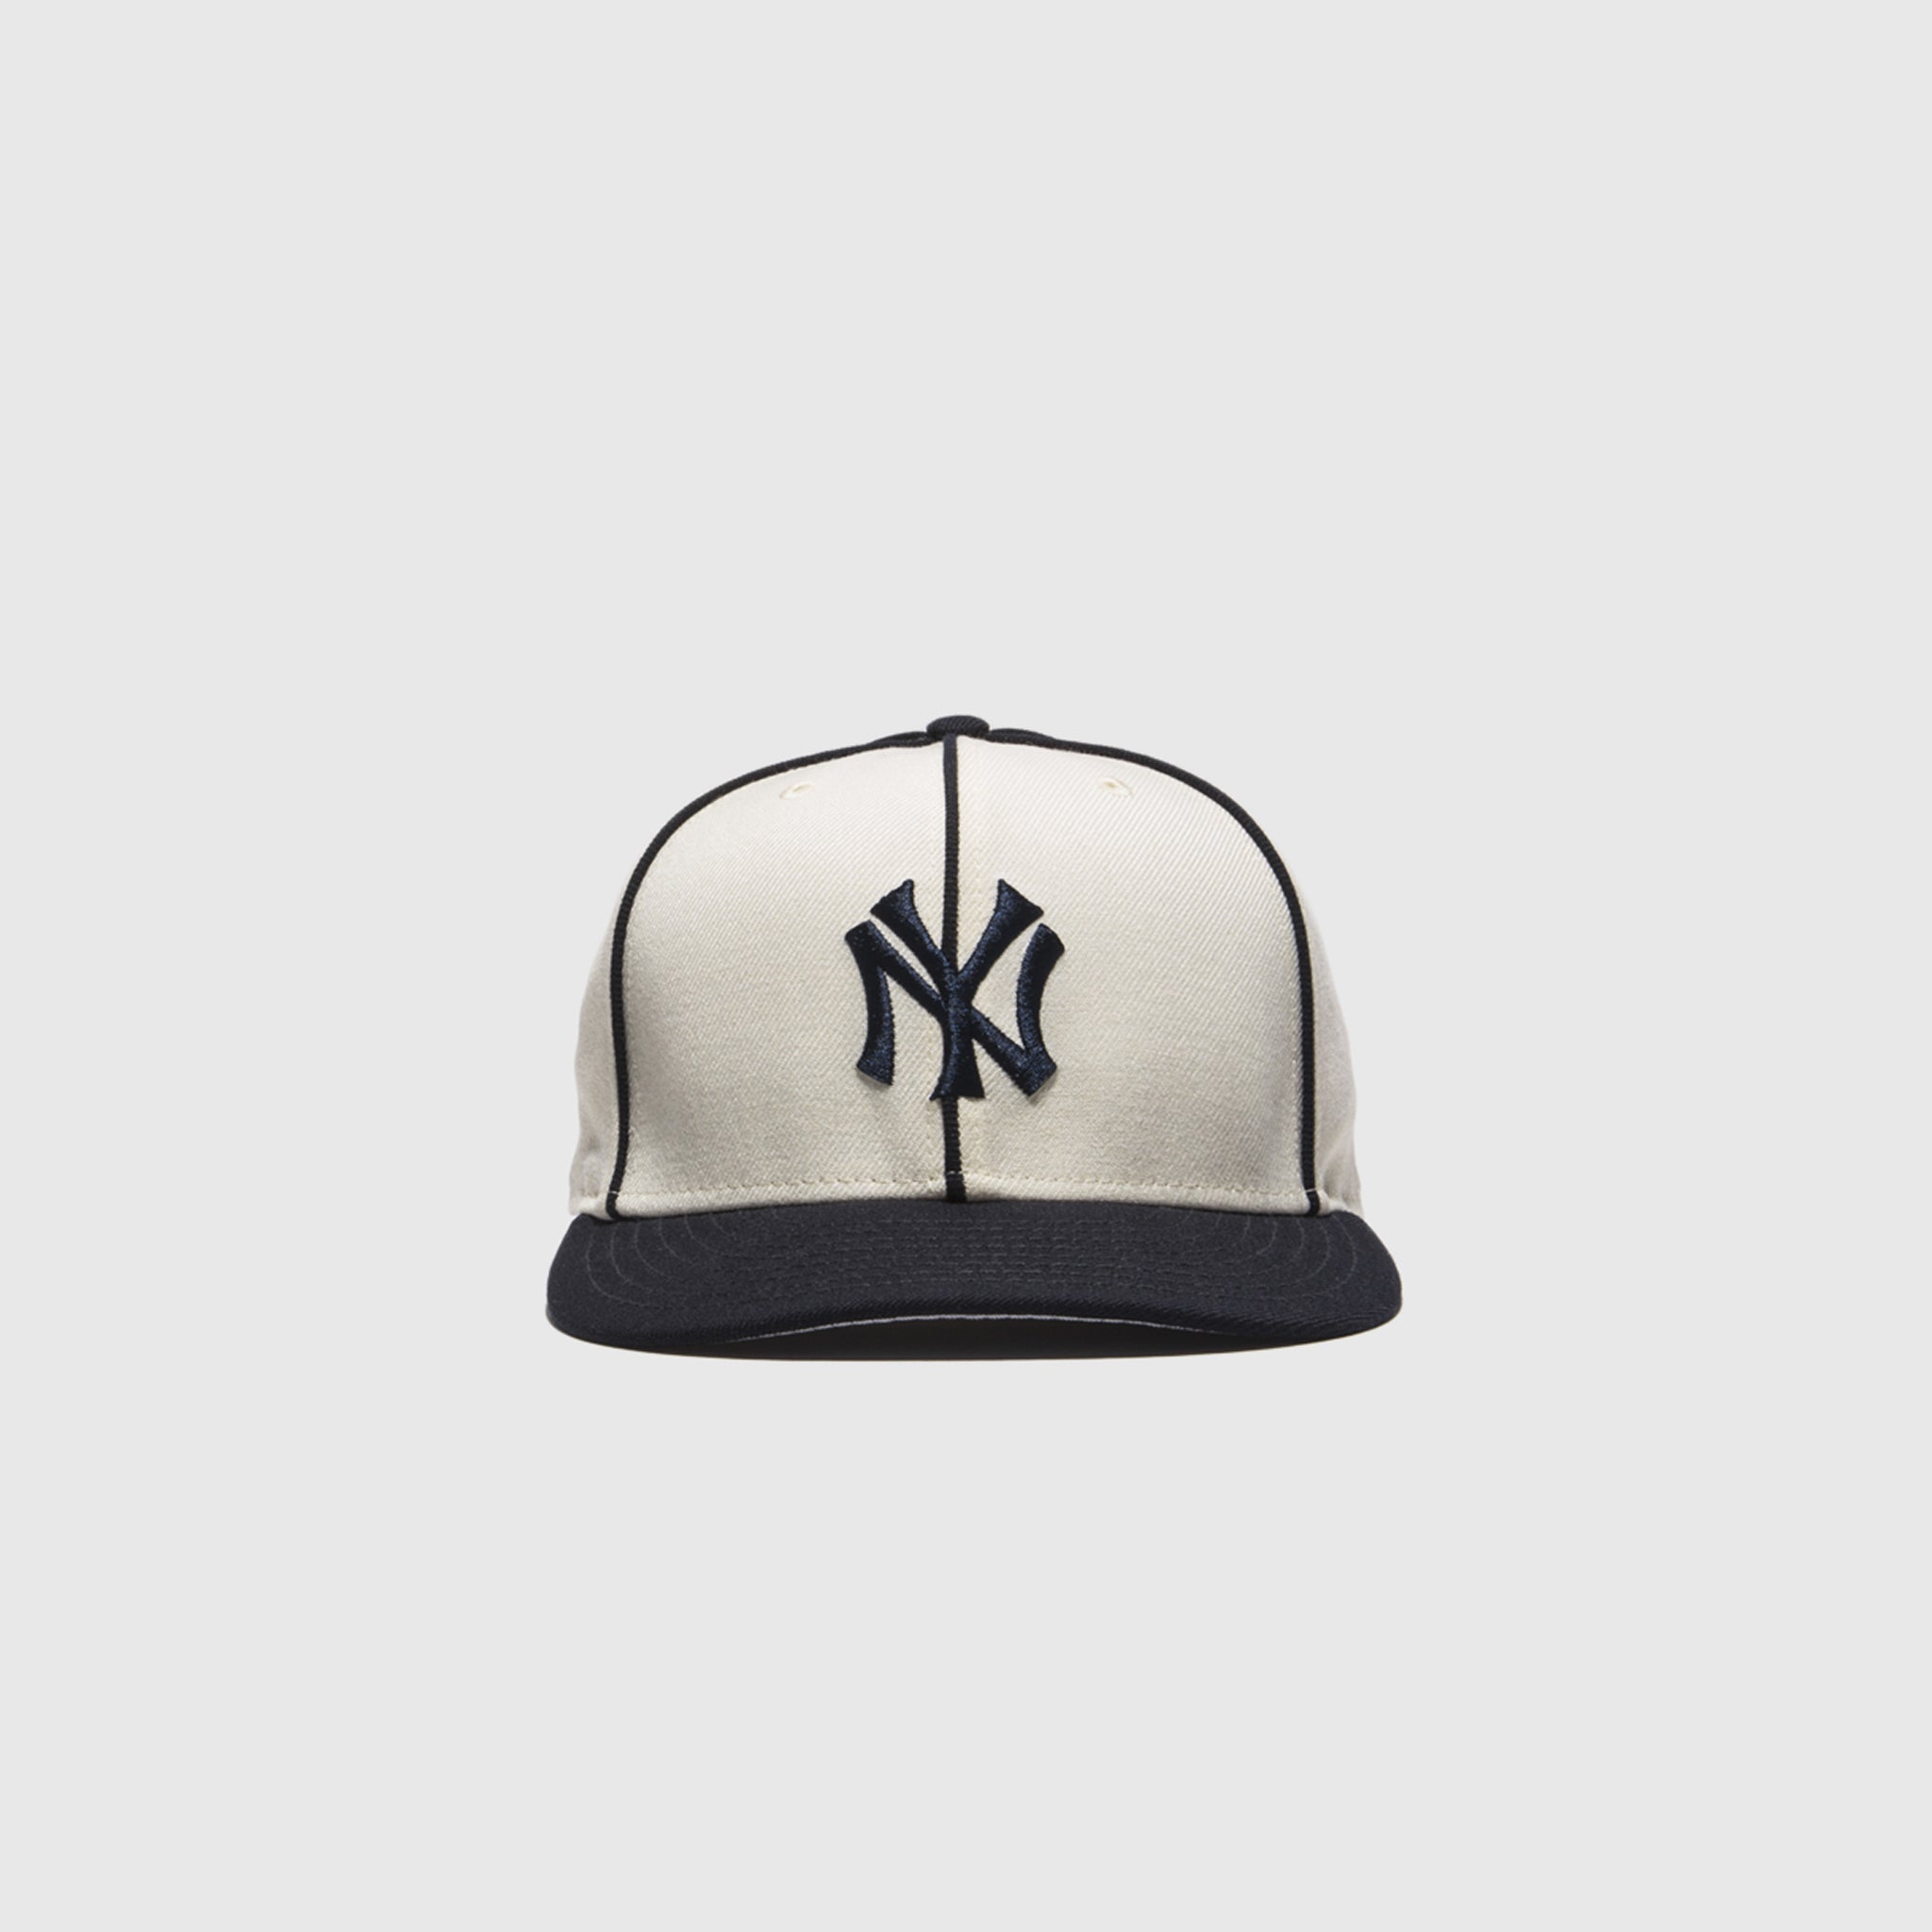 PACKER X NEW ERA NEW YORK YANKEES 1921 "PINSTRIPES" 59FIFTY FITTED